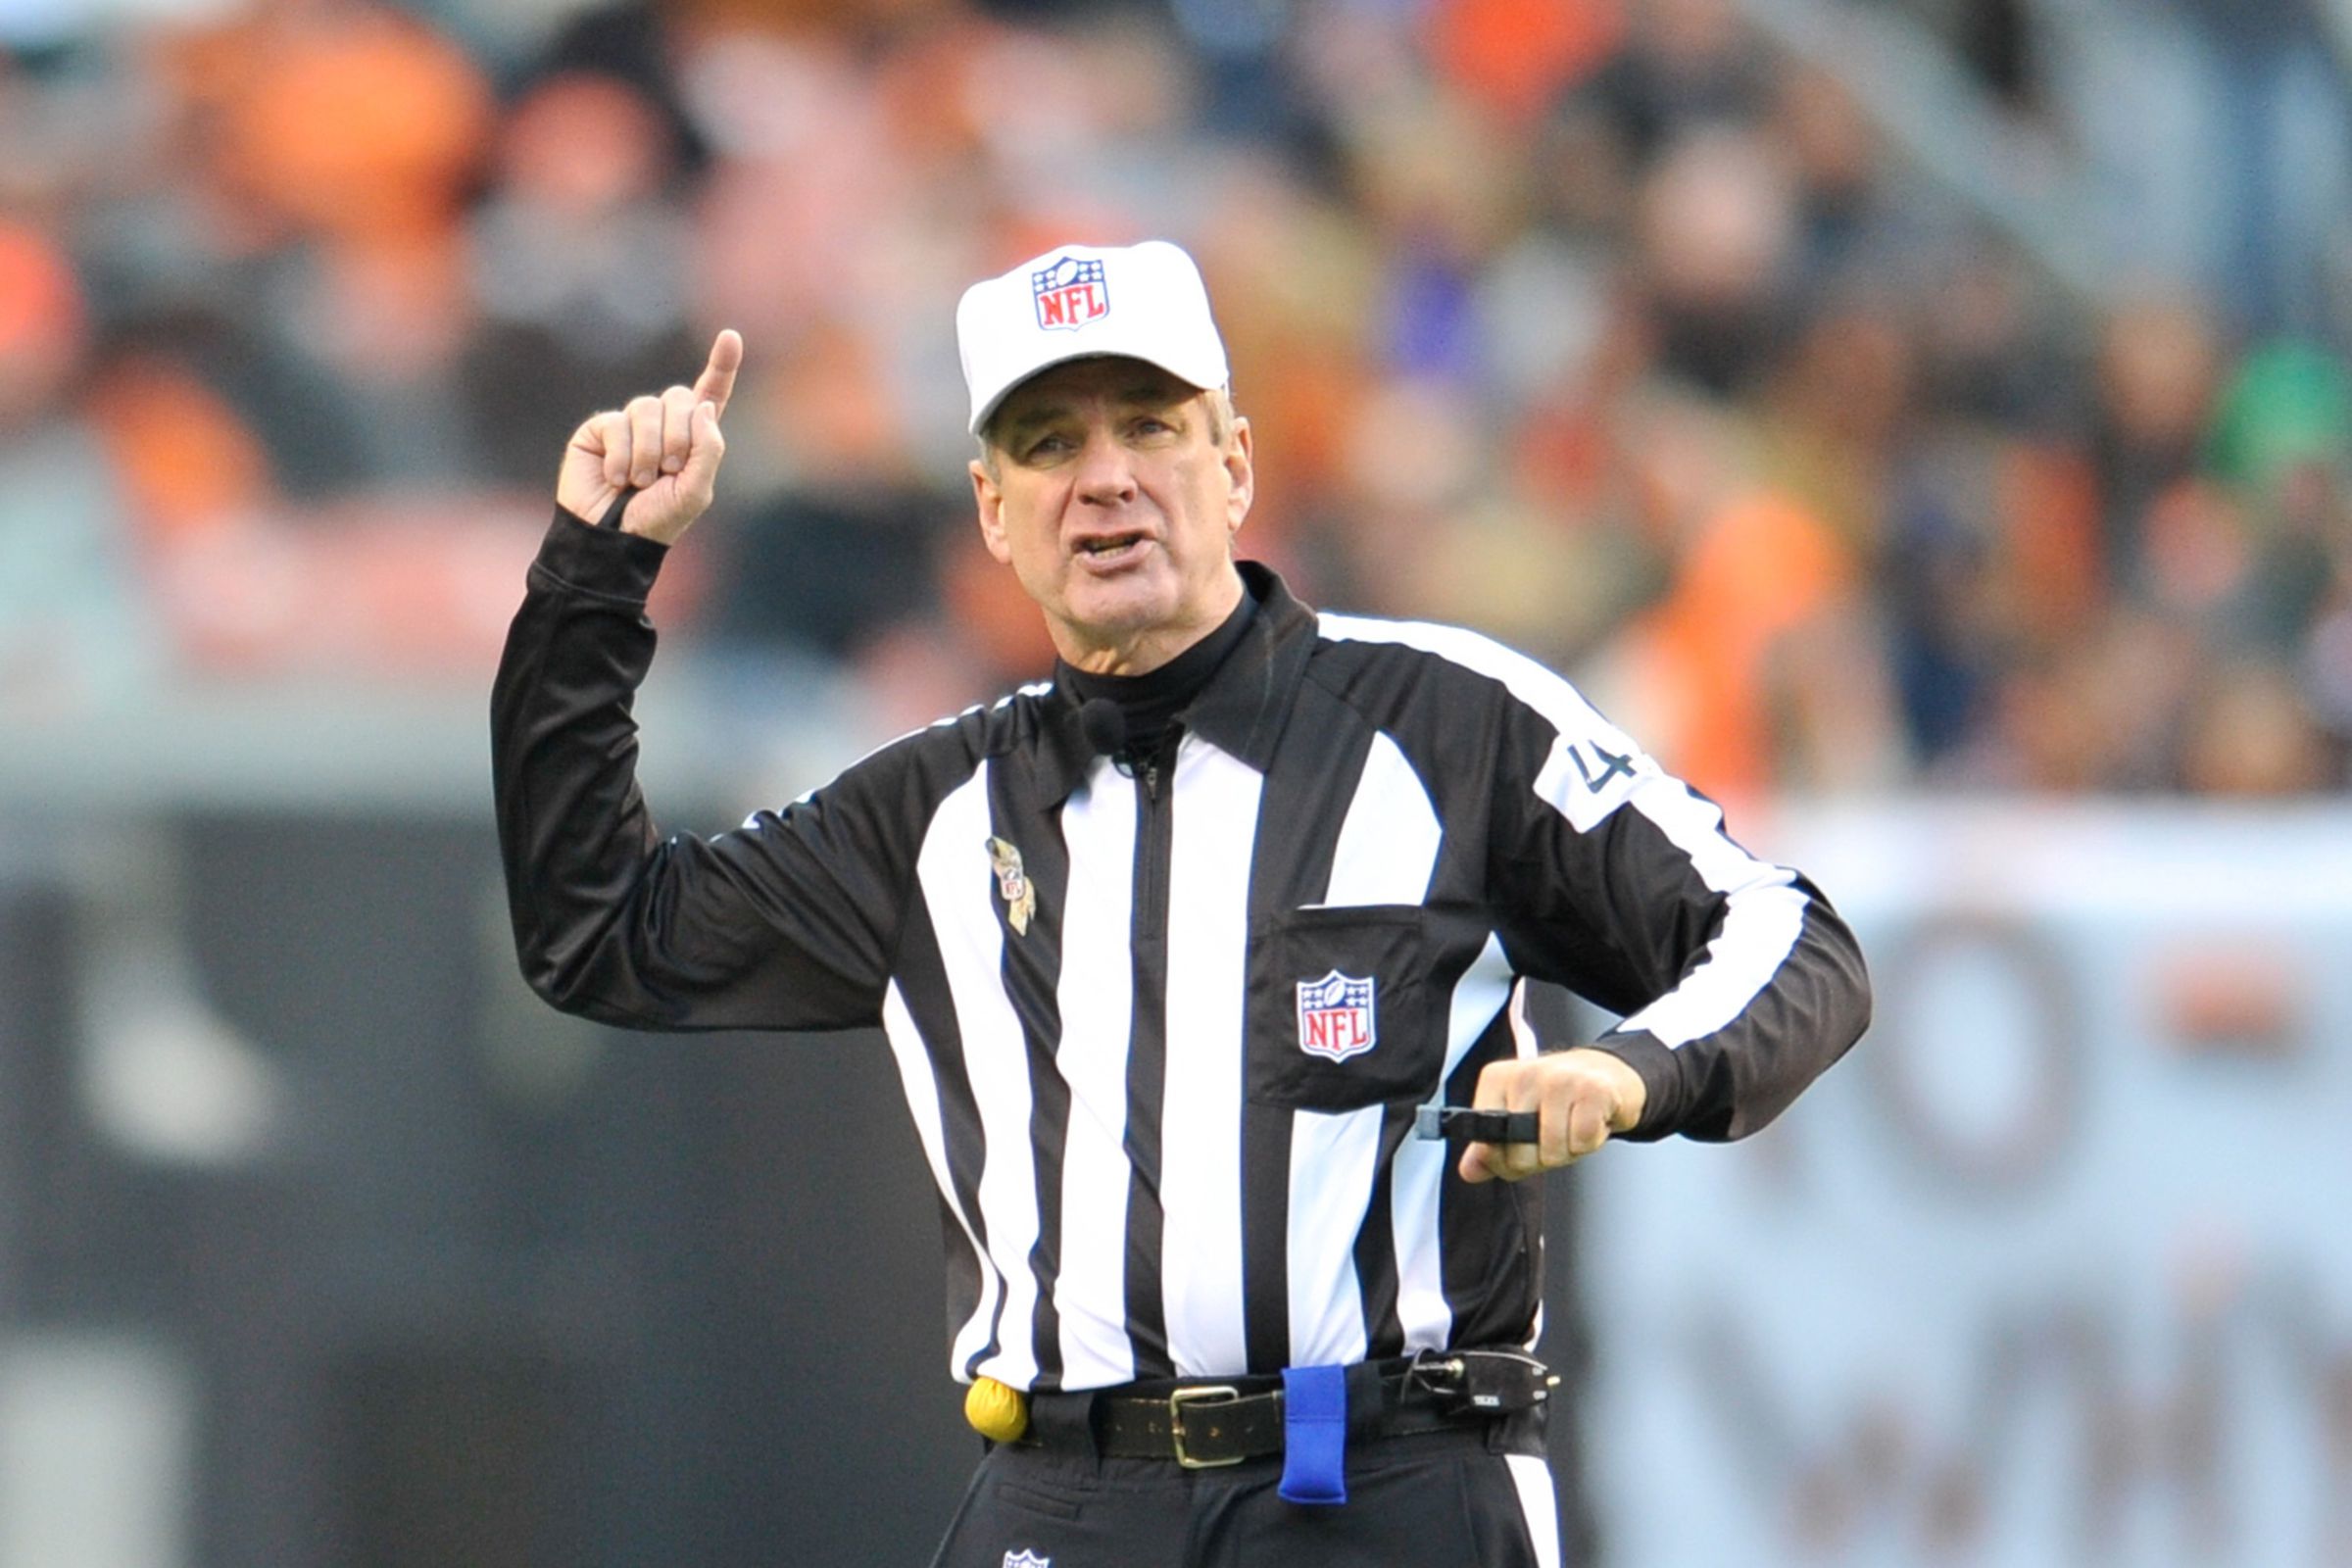 nfl referees assignments week 13